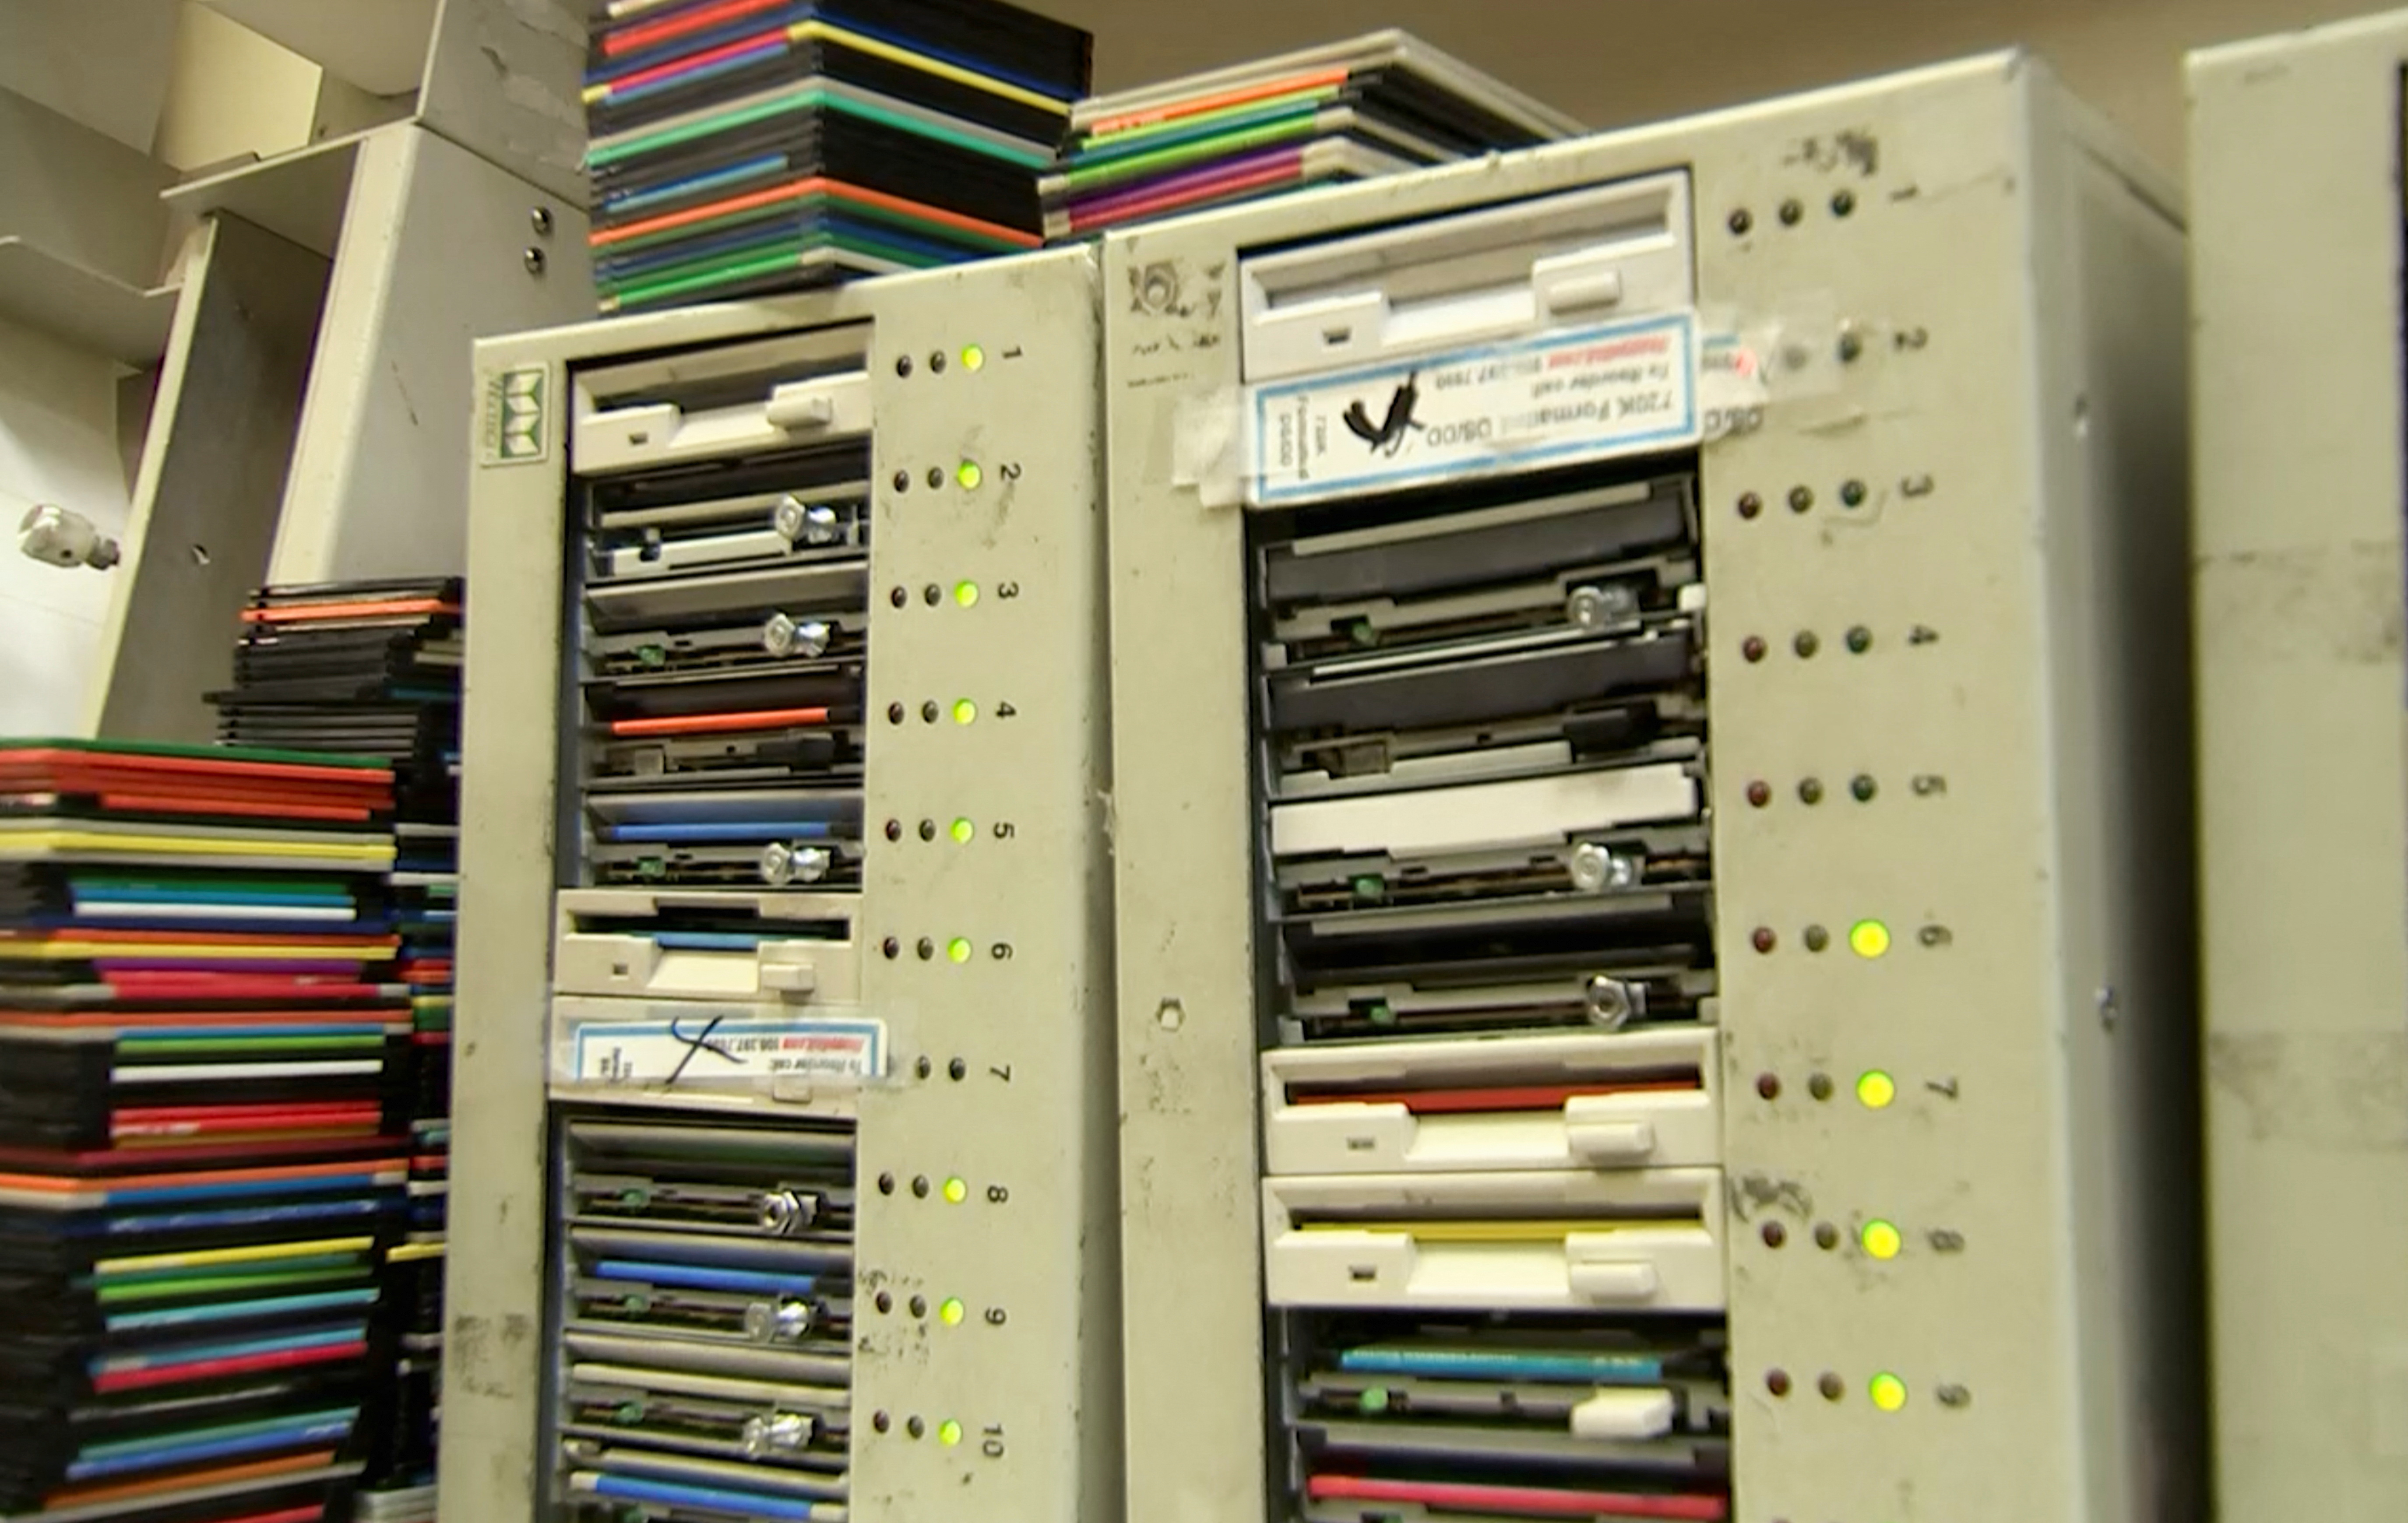 A 1990s relic, floppy disks get second life at California warehouse